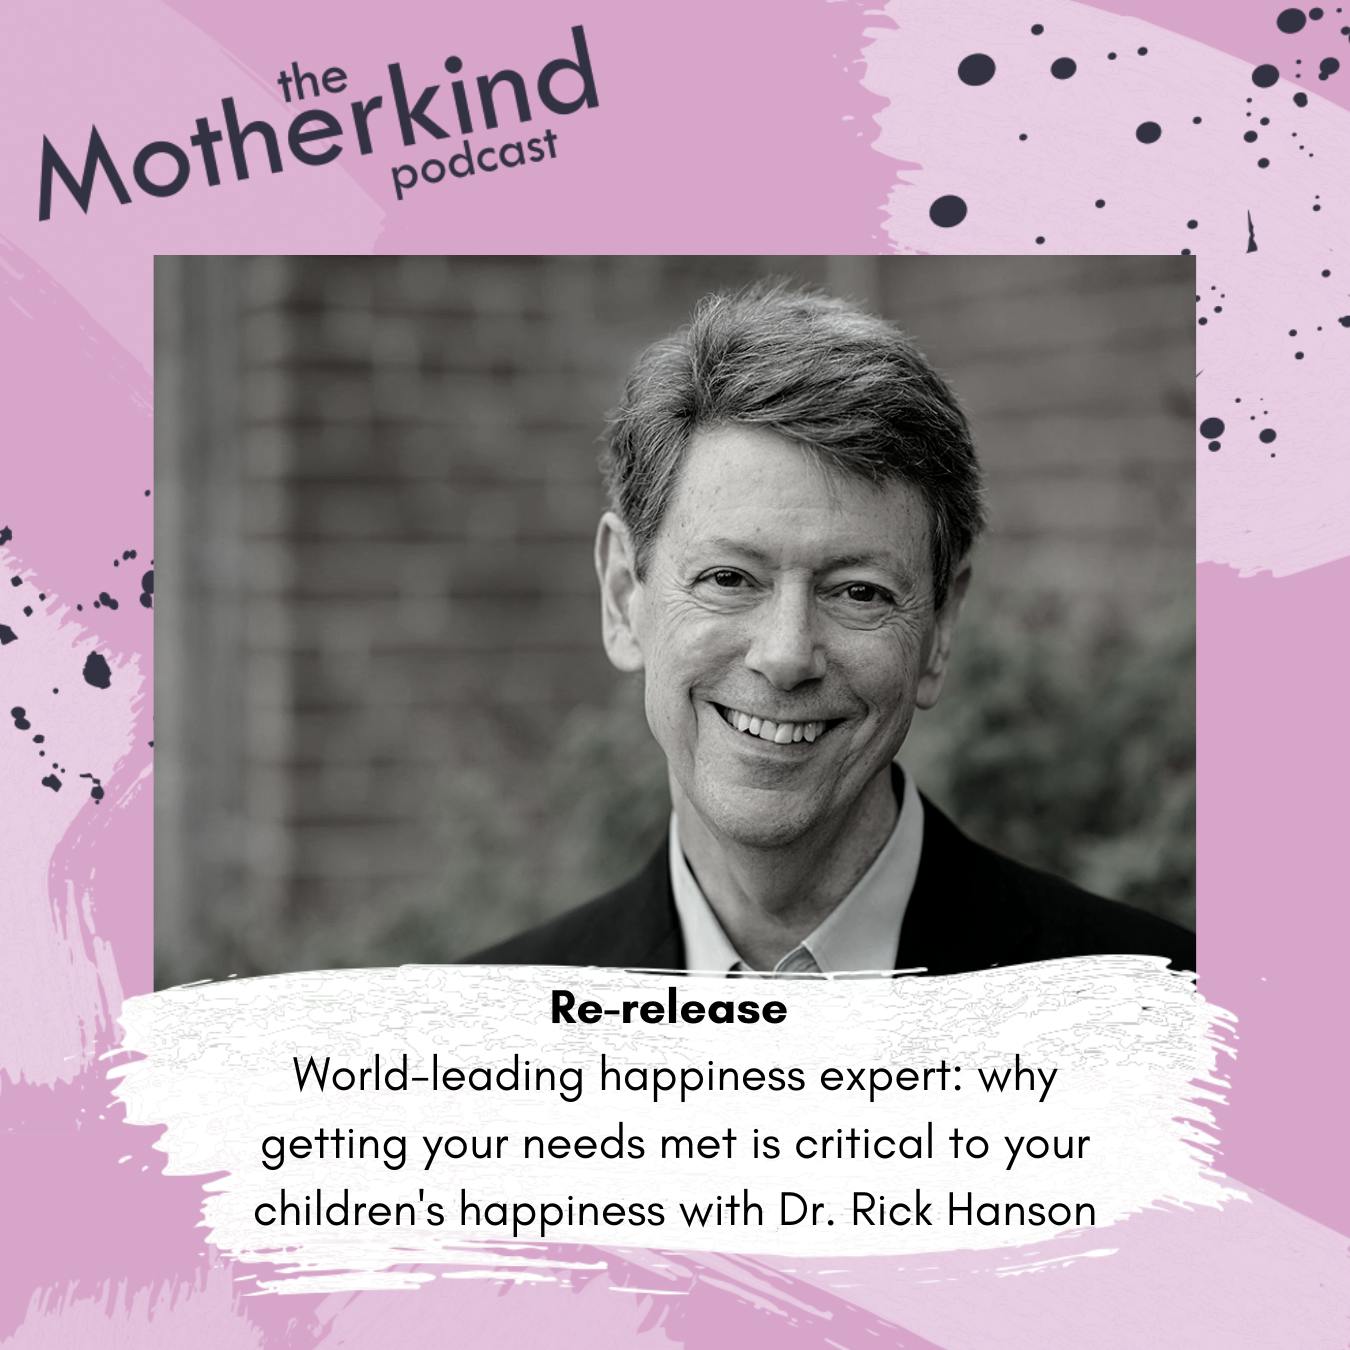 Re-release | World-leading happiness expert: why getting your needs met is critical to your children's happiness with Dr. Rick Hanson